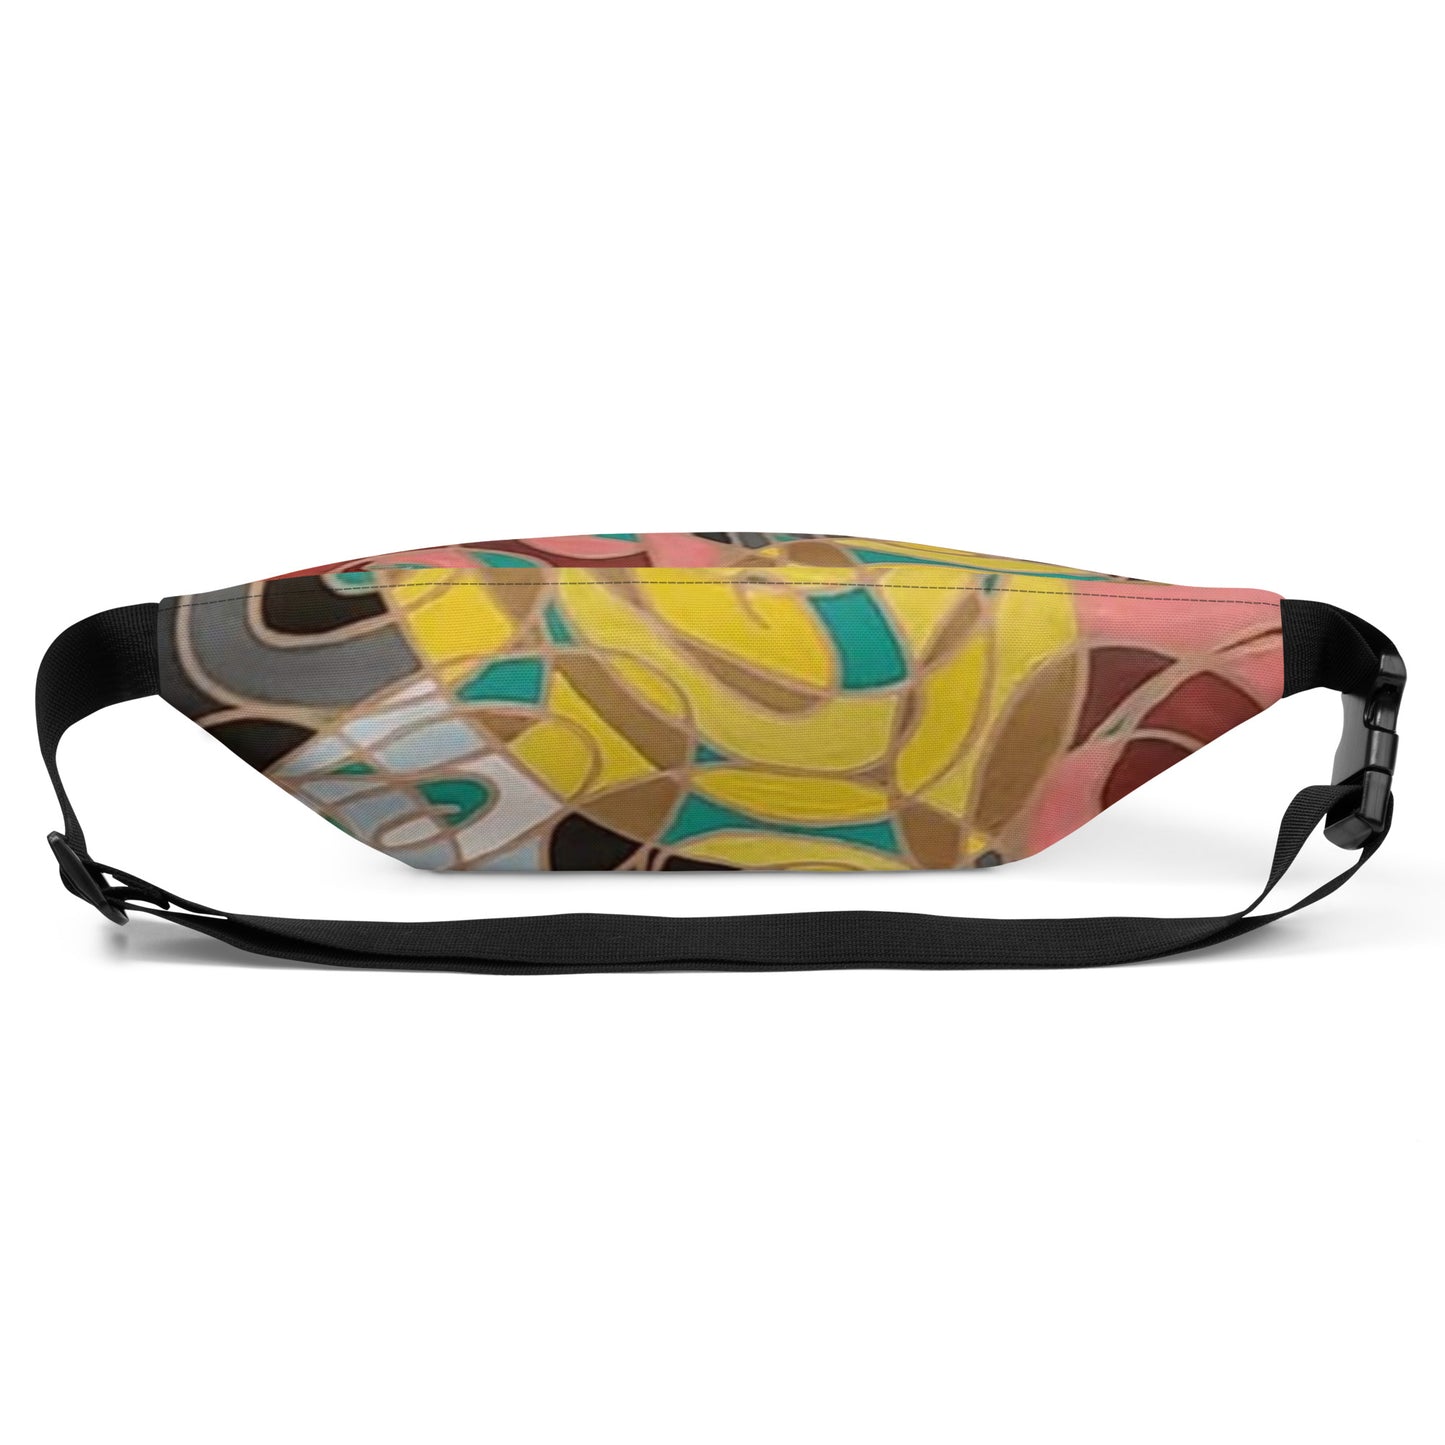 Red and Yellow, Black and White Fanny Pack